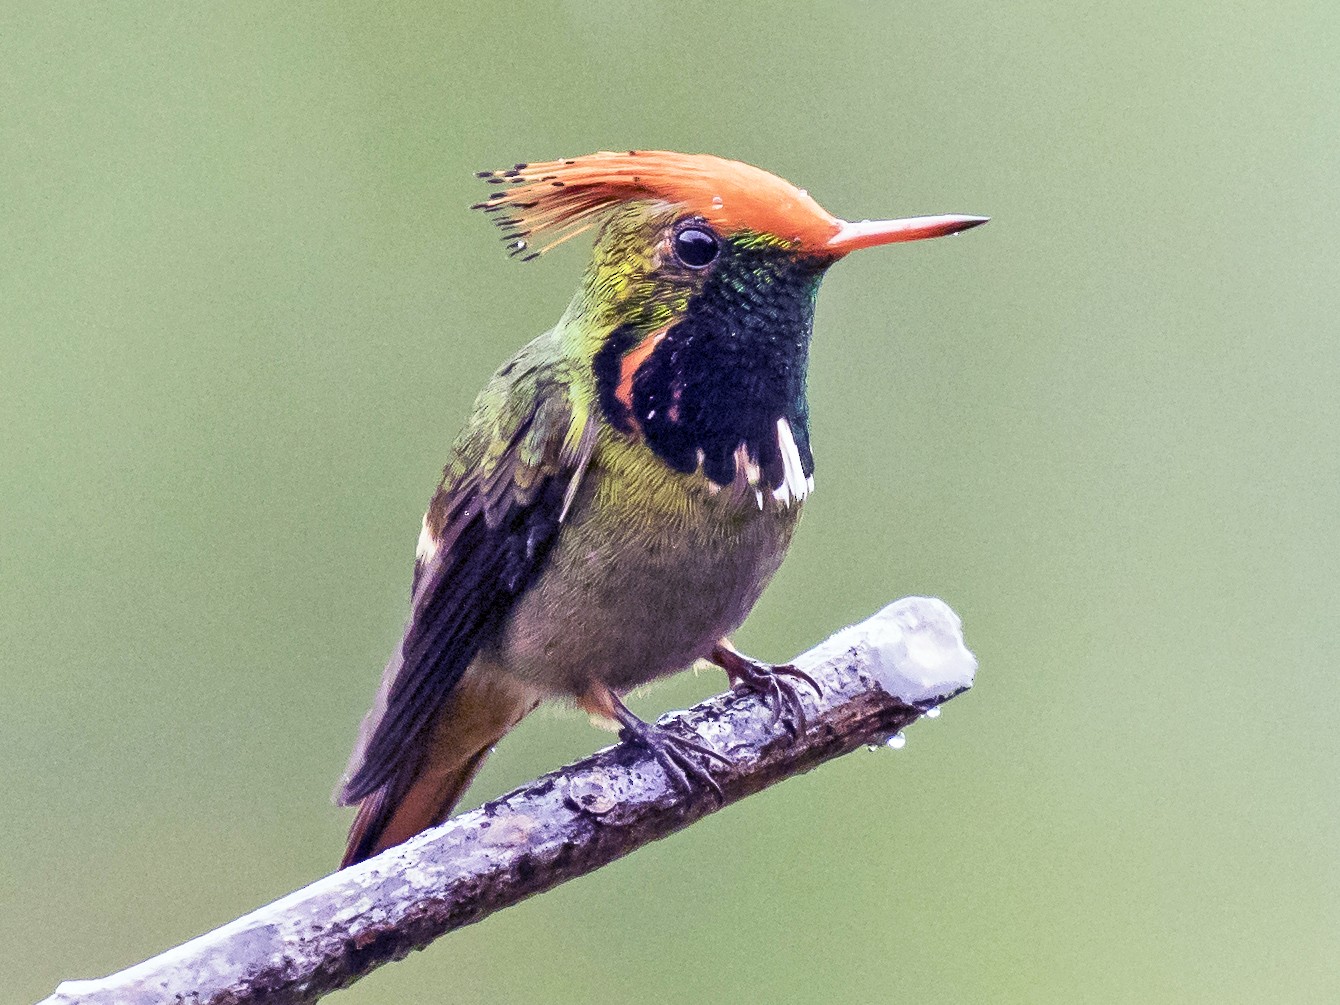 Meet the Rufous-Crested Coquette A uniquely fat little hummingbird